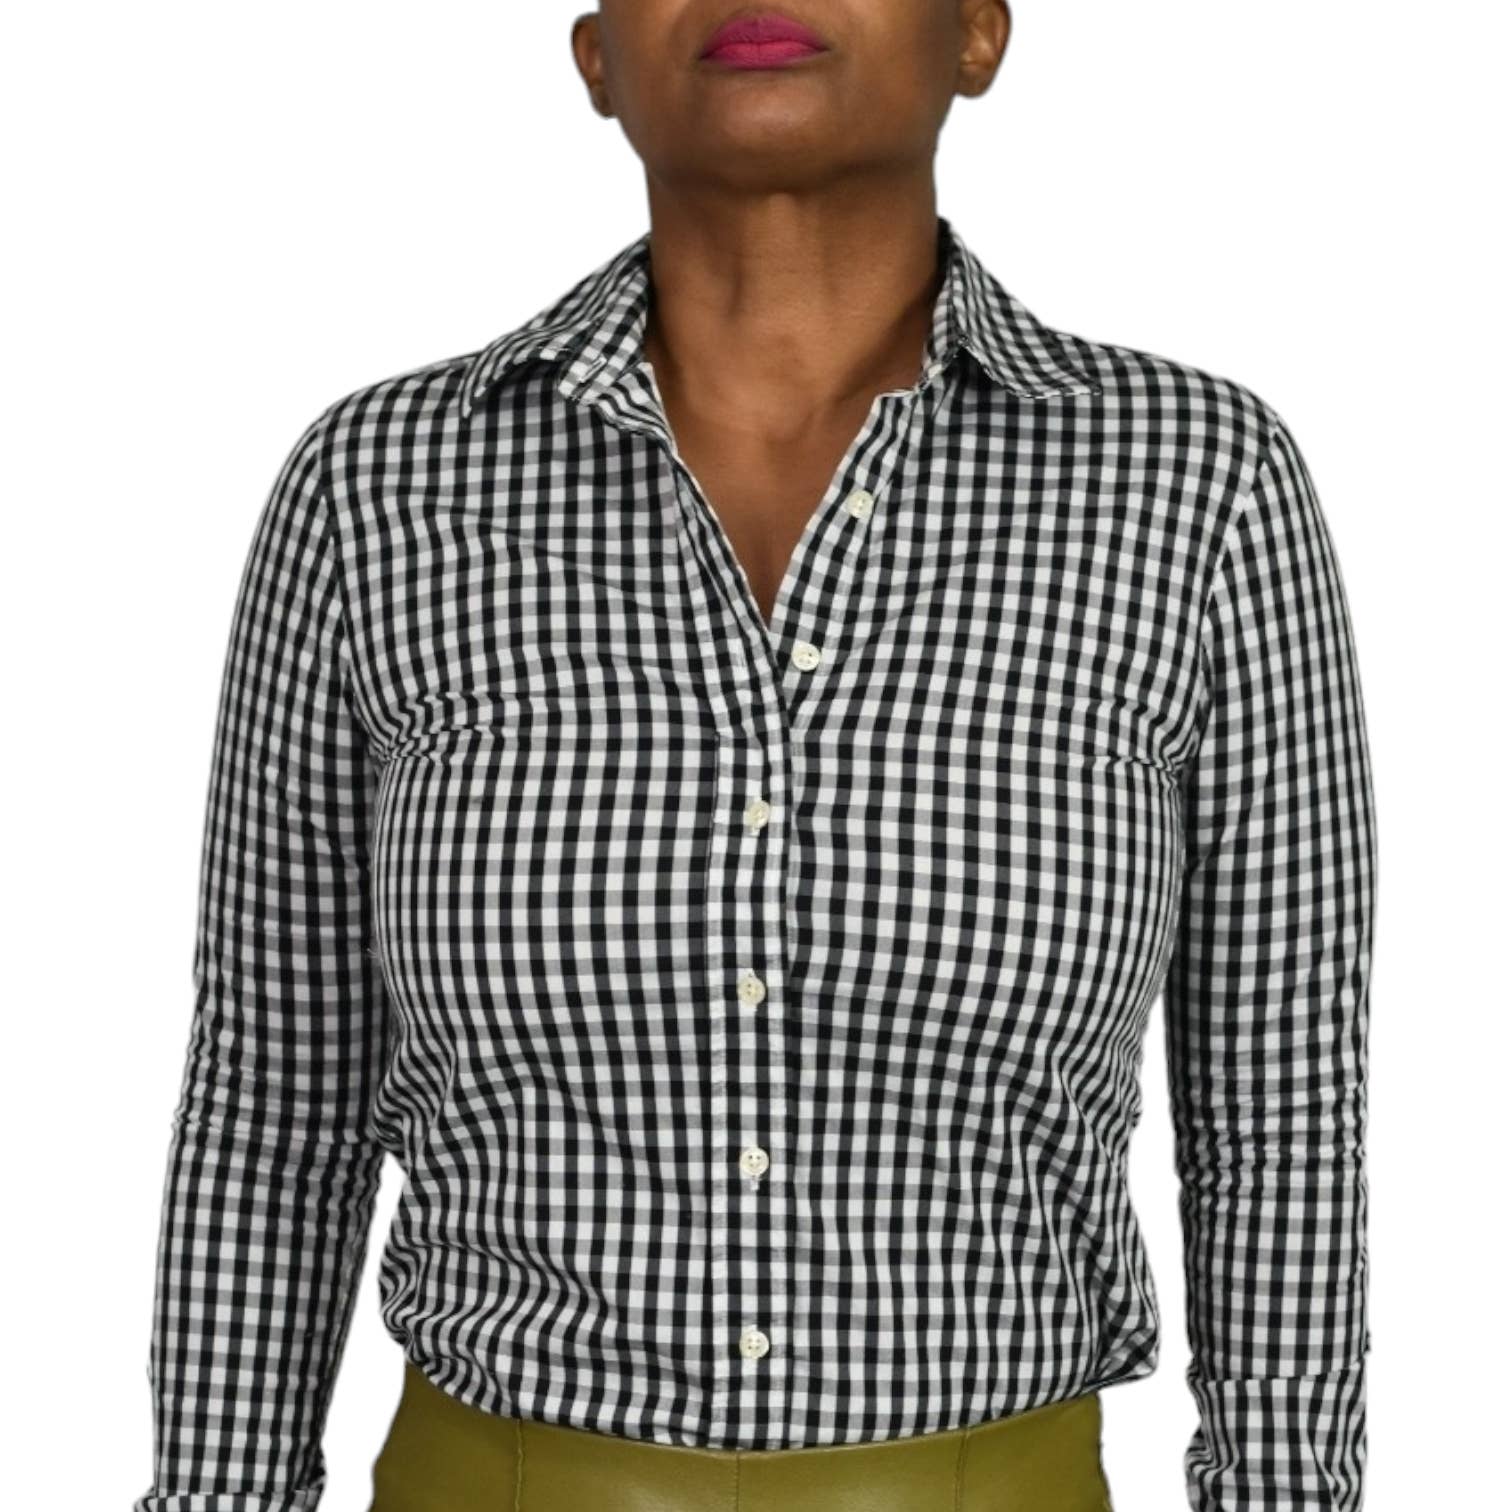 The Shirt Rochelle Behrens Icon Black Check Gingham White Button Front Tailored No Gape Stretch Size XS